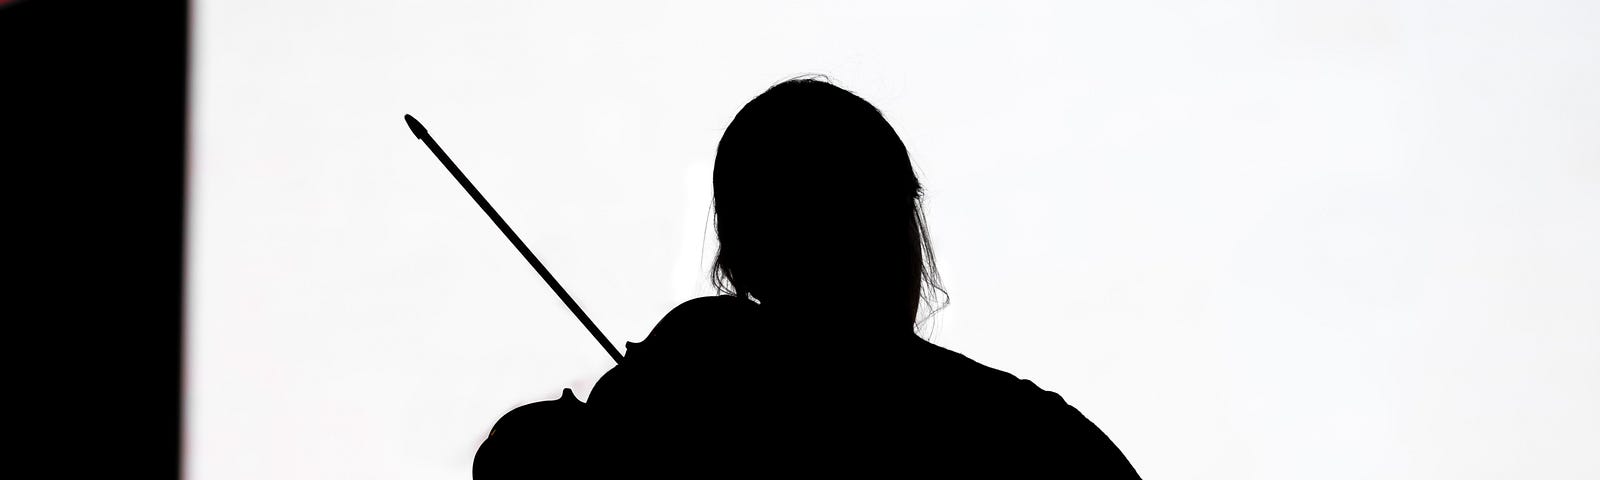 A sillouhette of a violinist playing toward a white screen